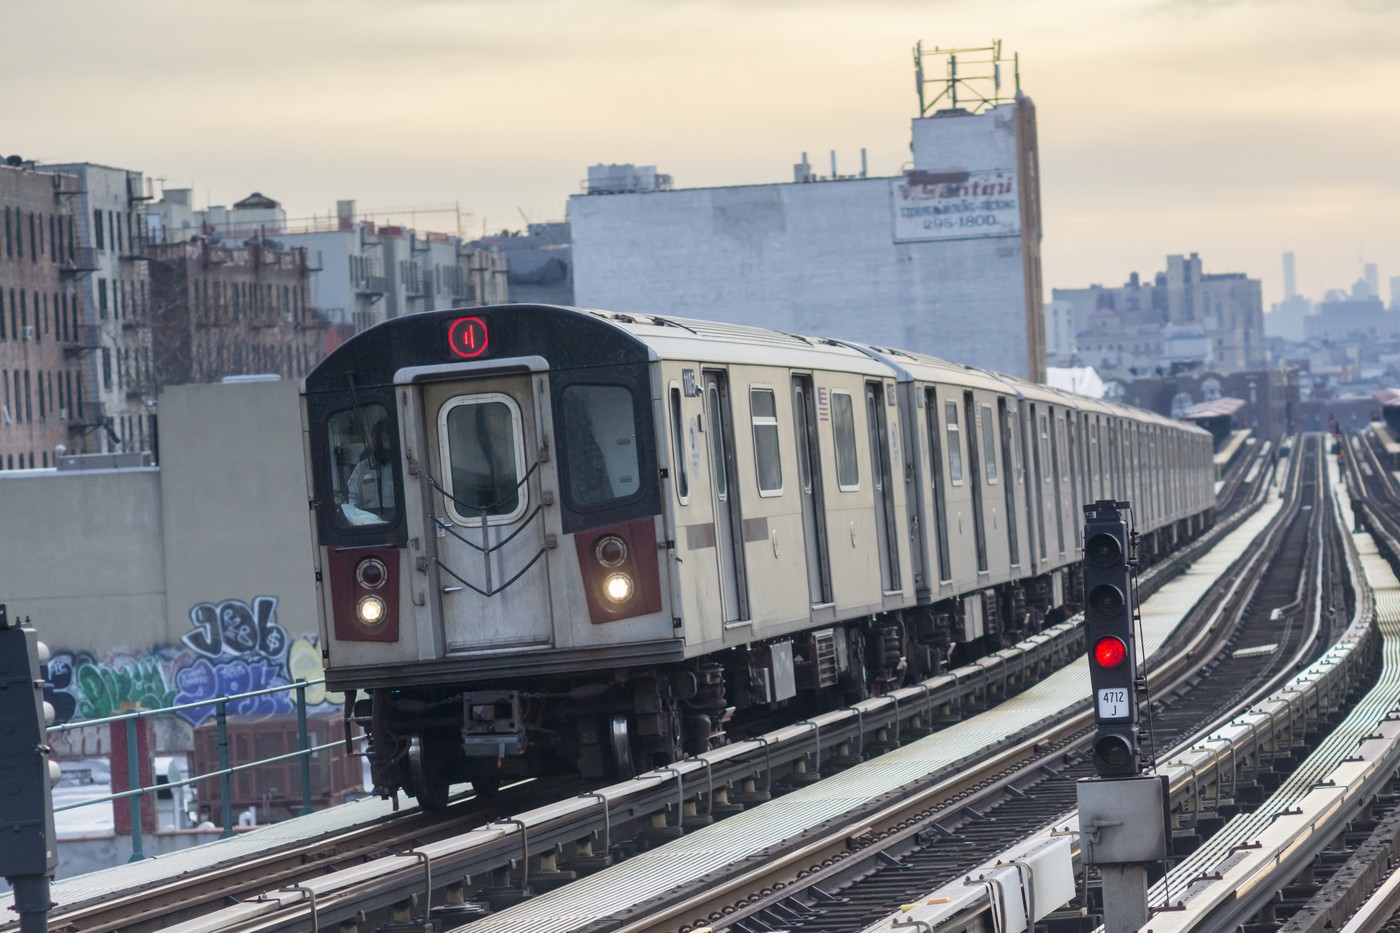 A Number 4 IRT elevated subway train in the Bronx in New York on Thursday, January 7, 2016. (ï¿½ï¿½ Richard B. Levine) (Photo by Richard Levine/Corbis via Getty Images)